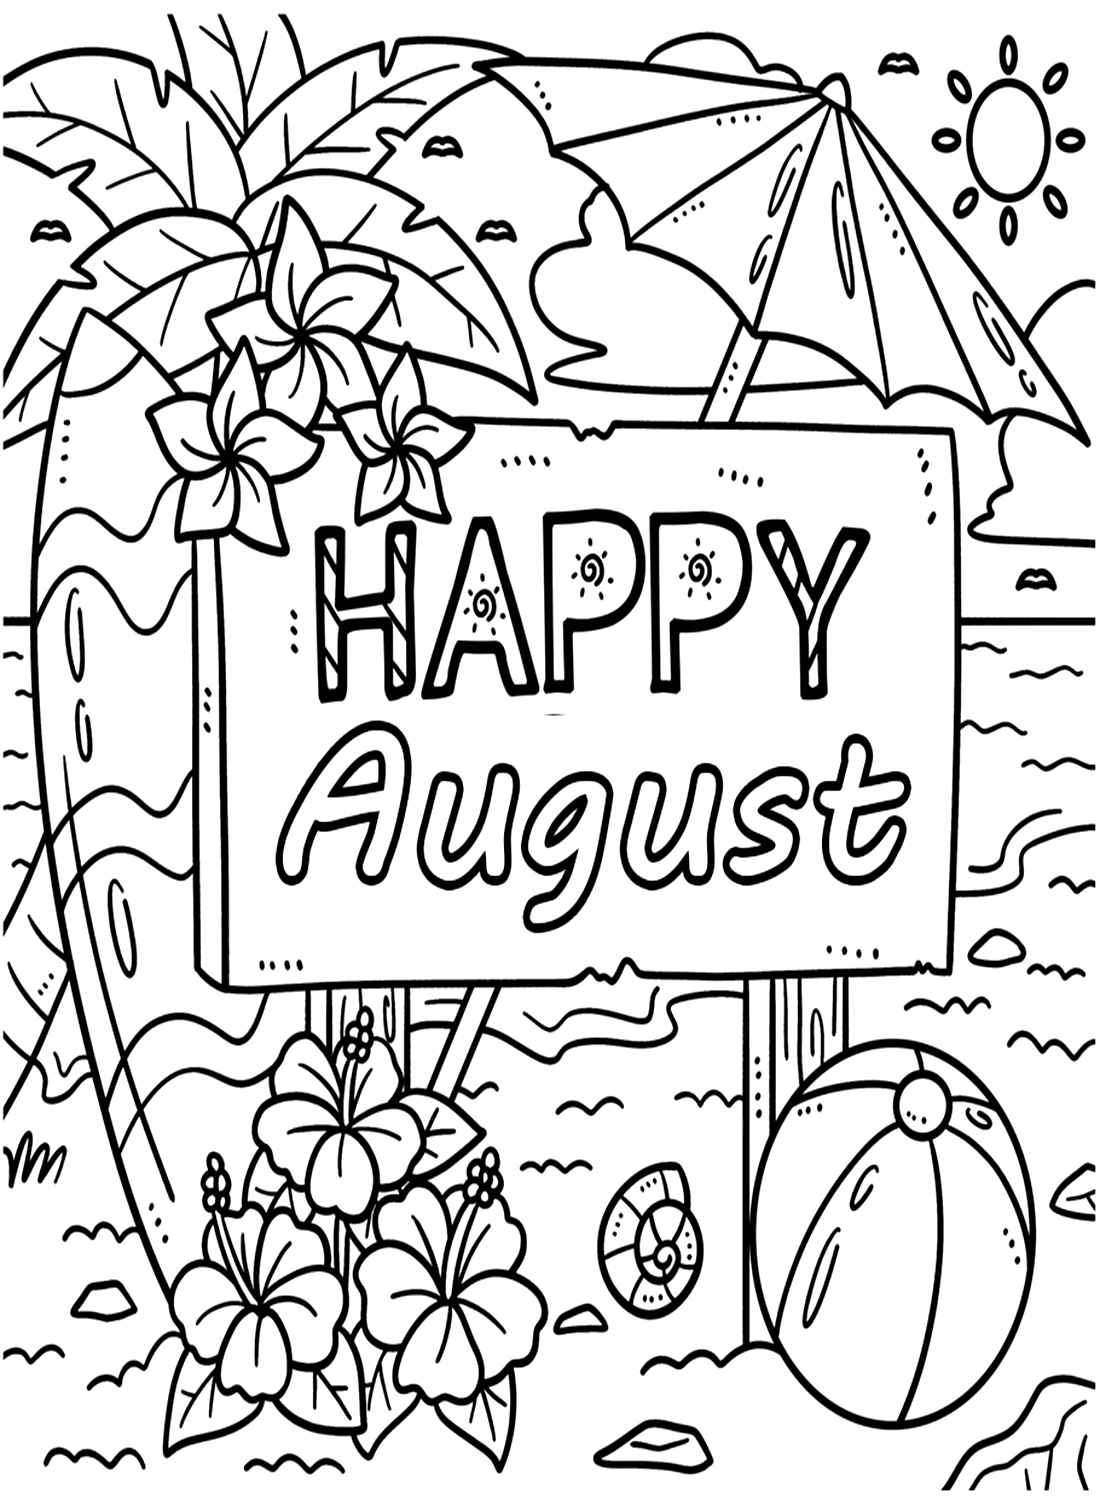 Happy August from August